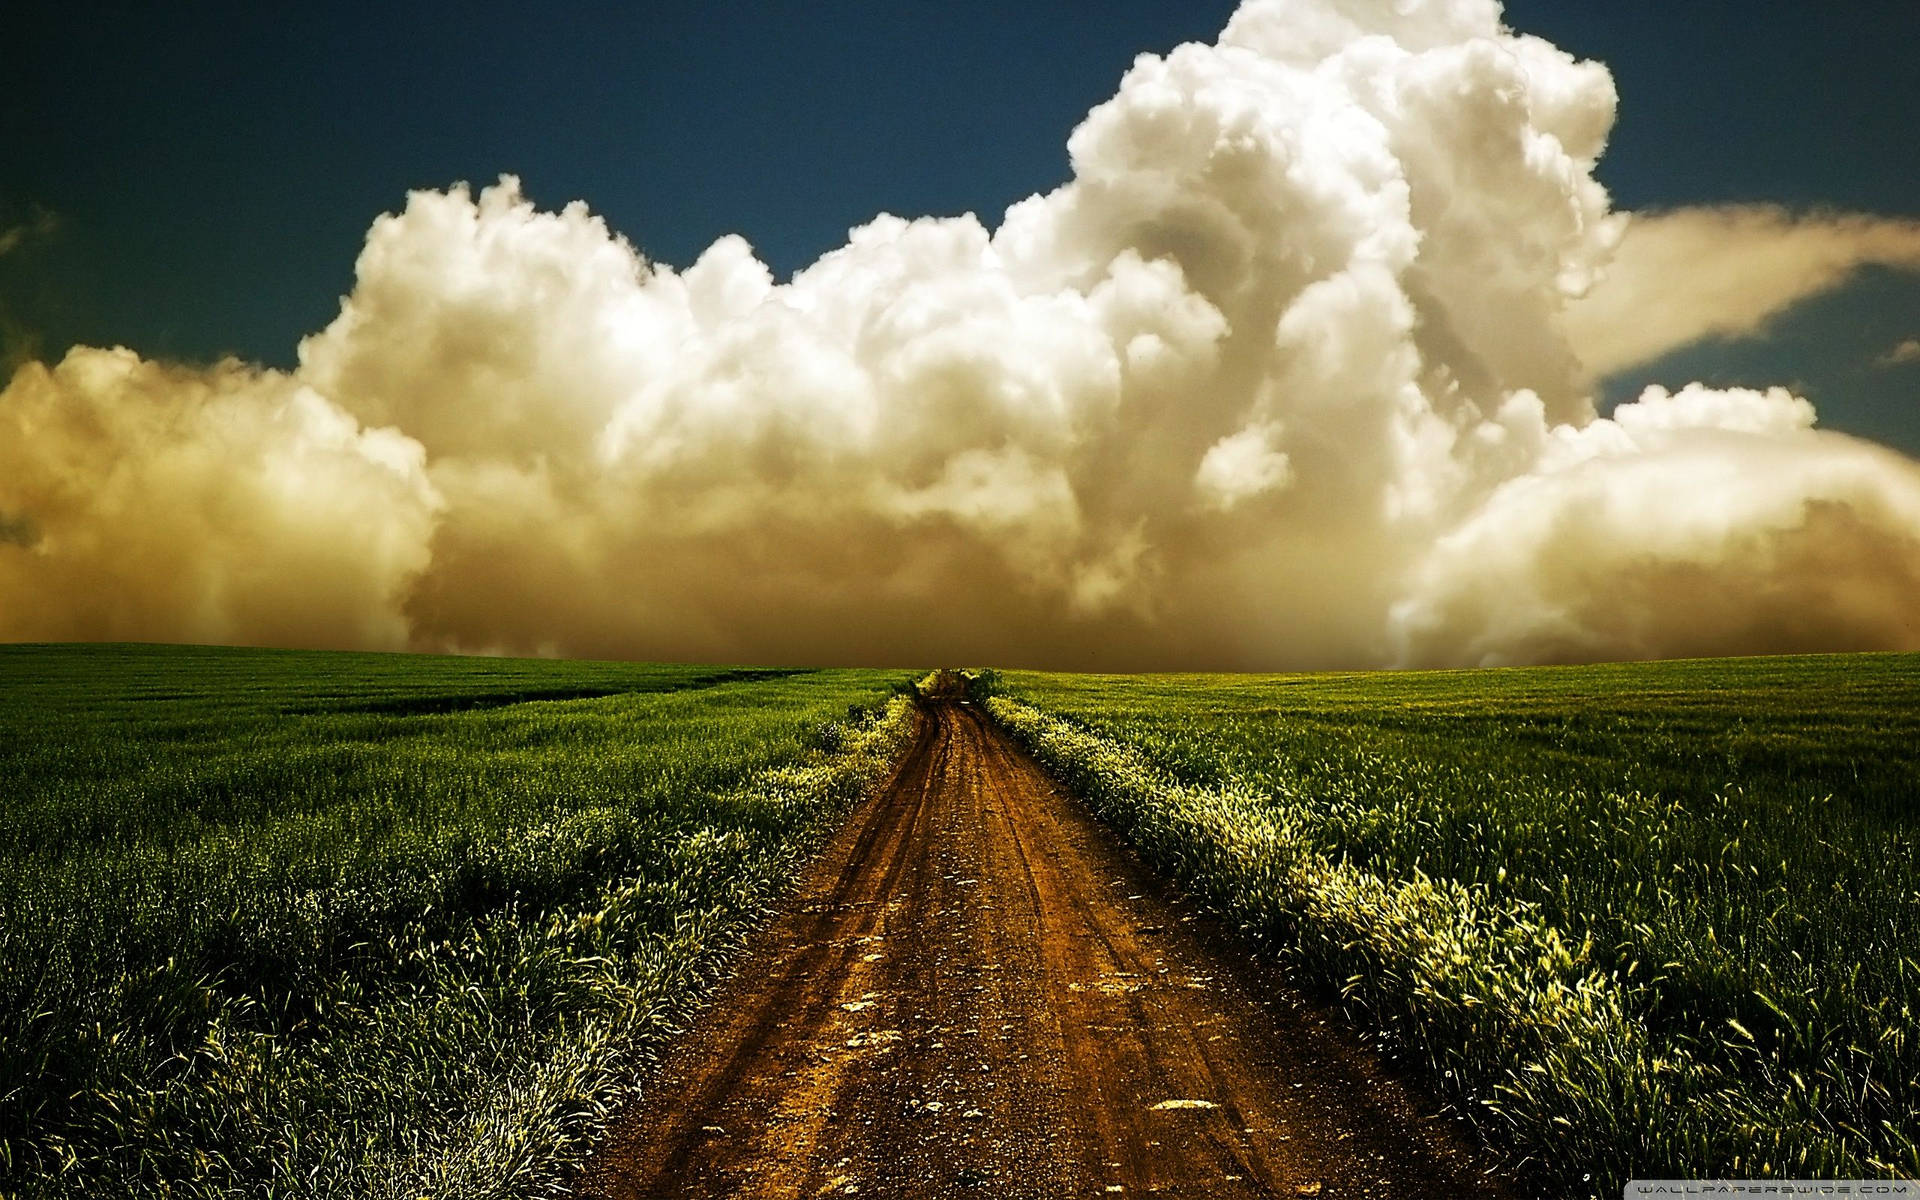 A Dirt Road With Clouds In The Sky Background